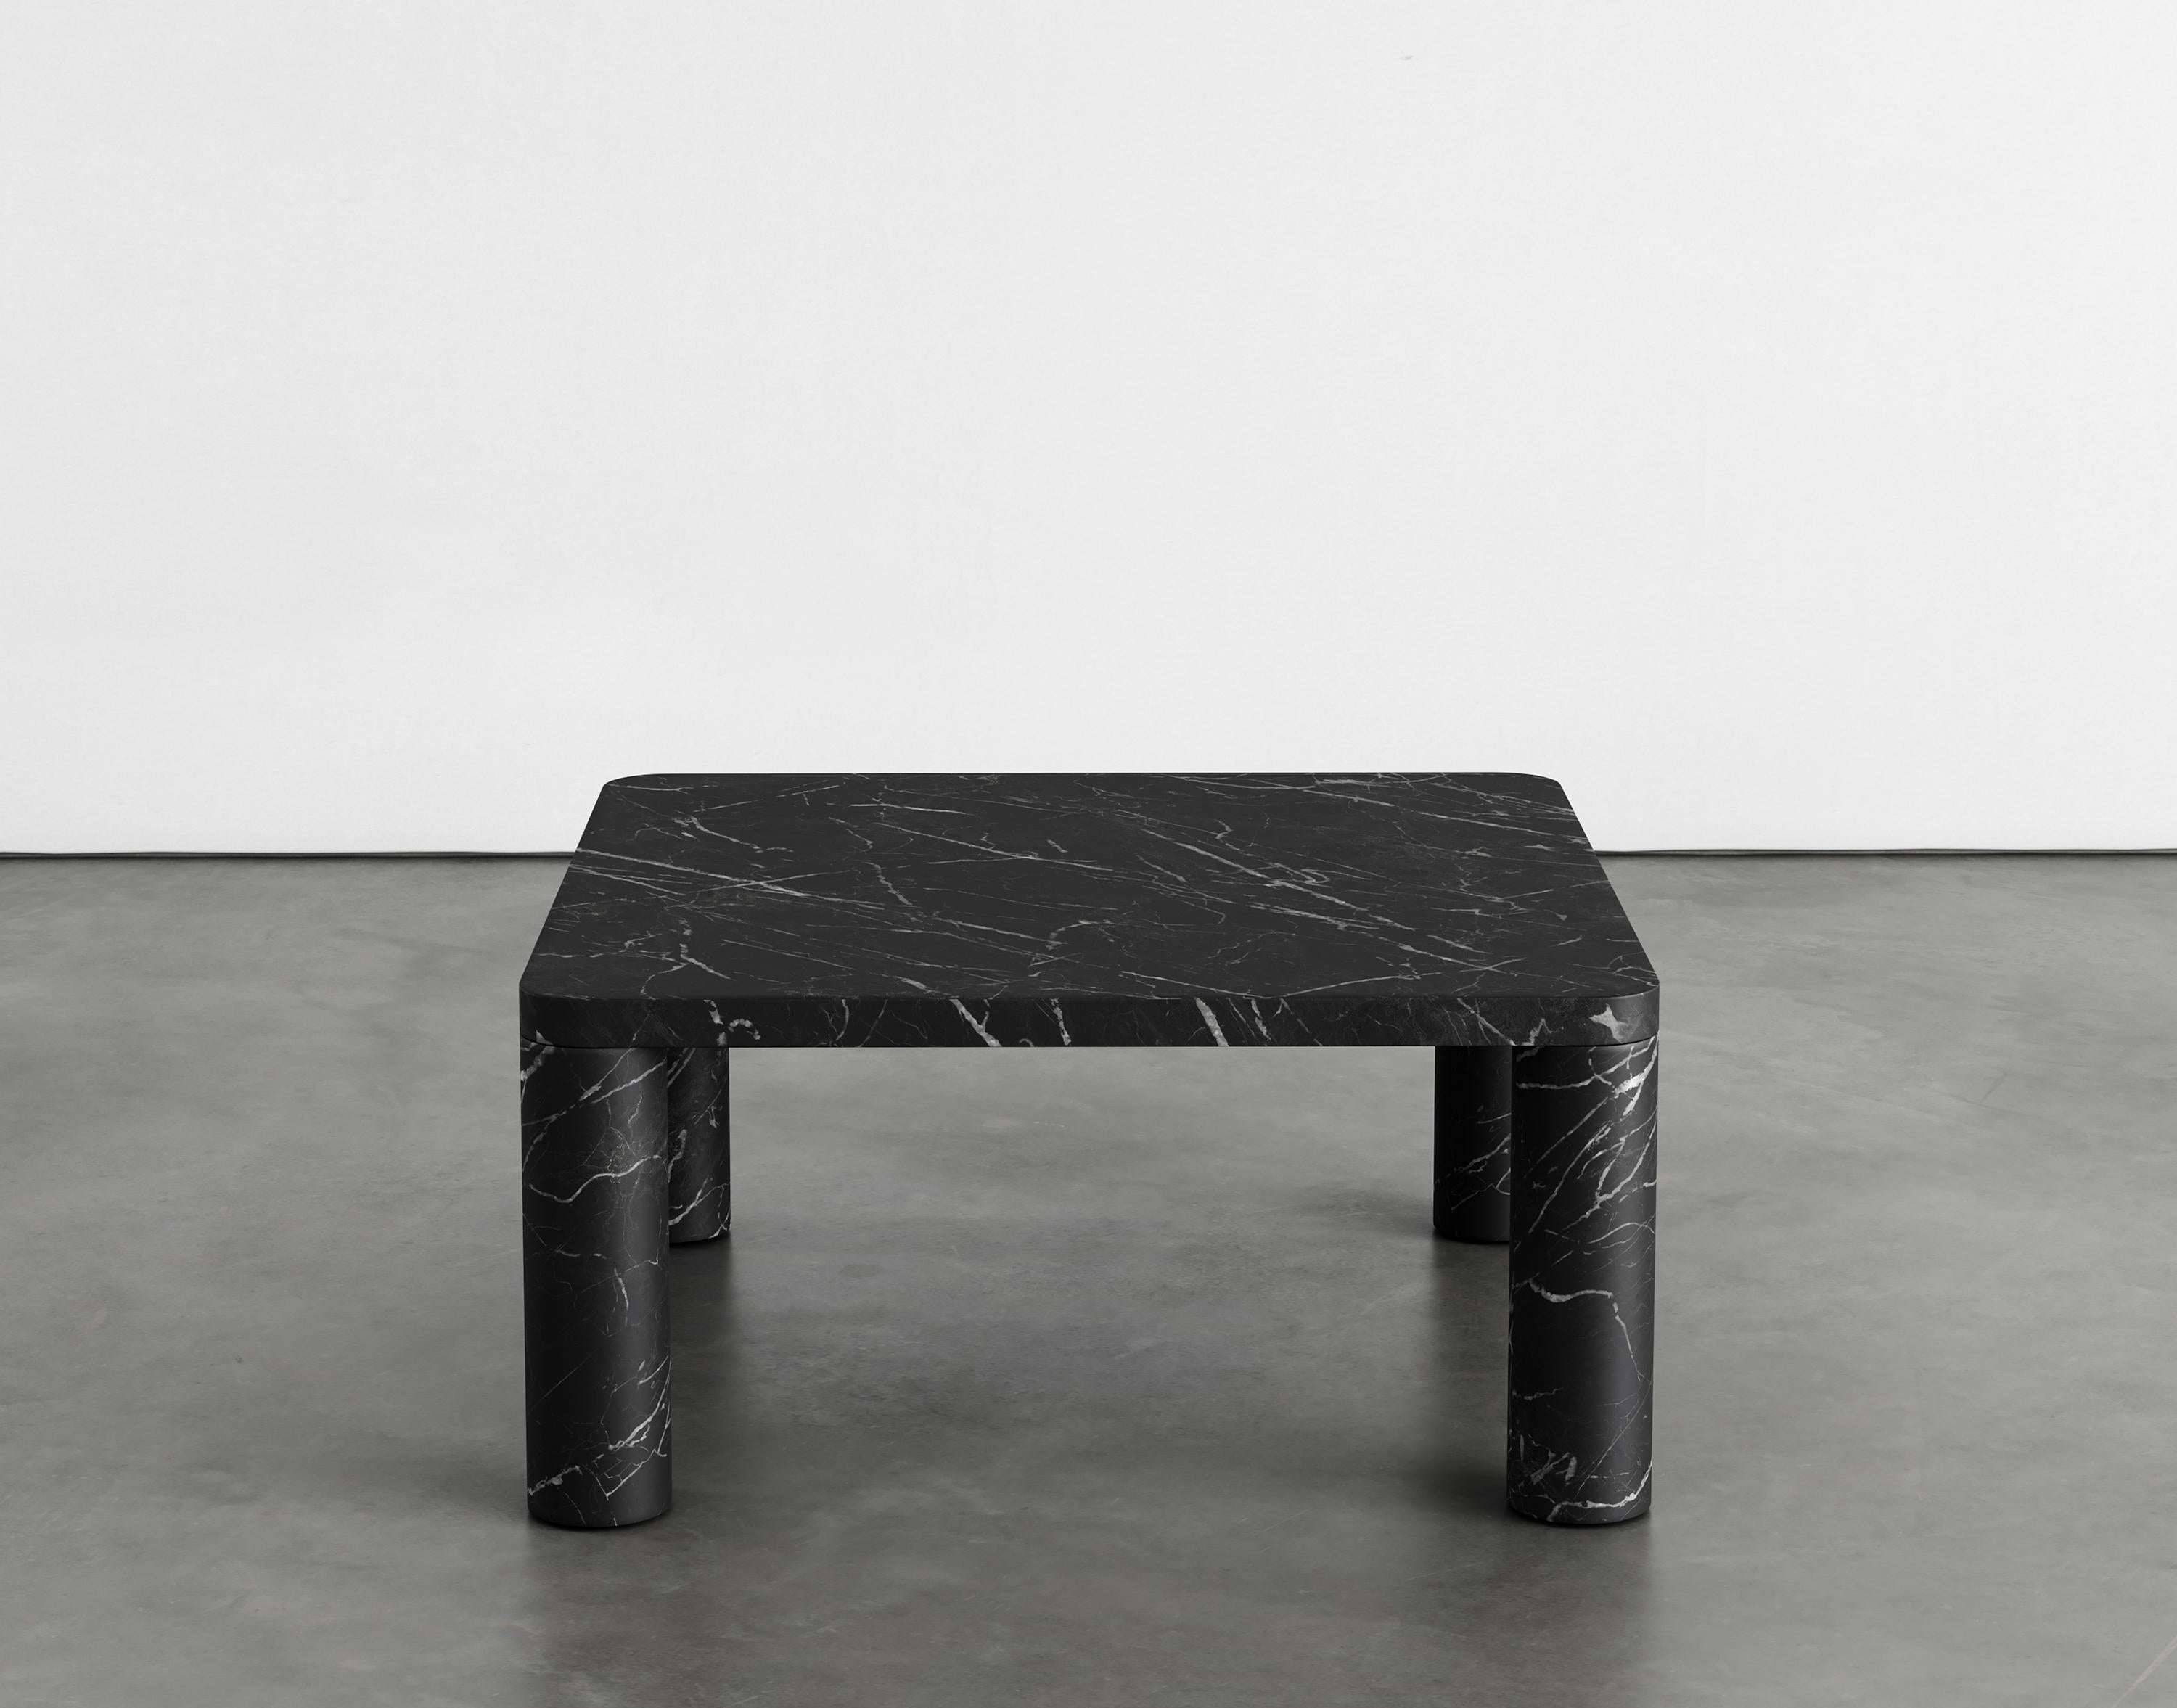 Nadia 70 marble coffee table by Agglomerati
Dimensions: D 70 x W 70 x H 33 cm
Materials: Nero Maquina marble
Available in other stones.

Nadia 70 coffee table is defined by its flush edge detailing. The rounded corners of the tabletop have a